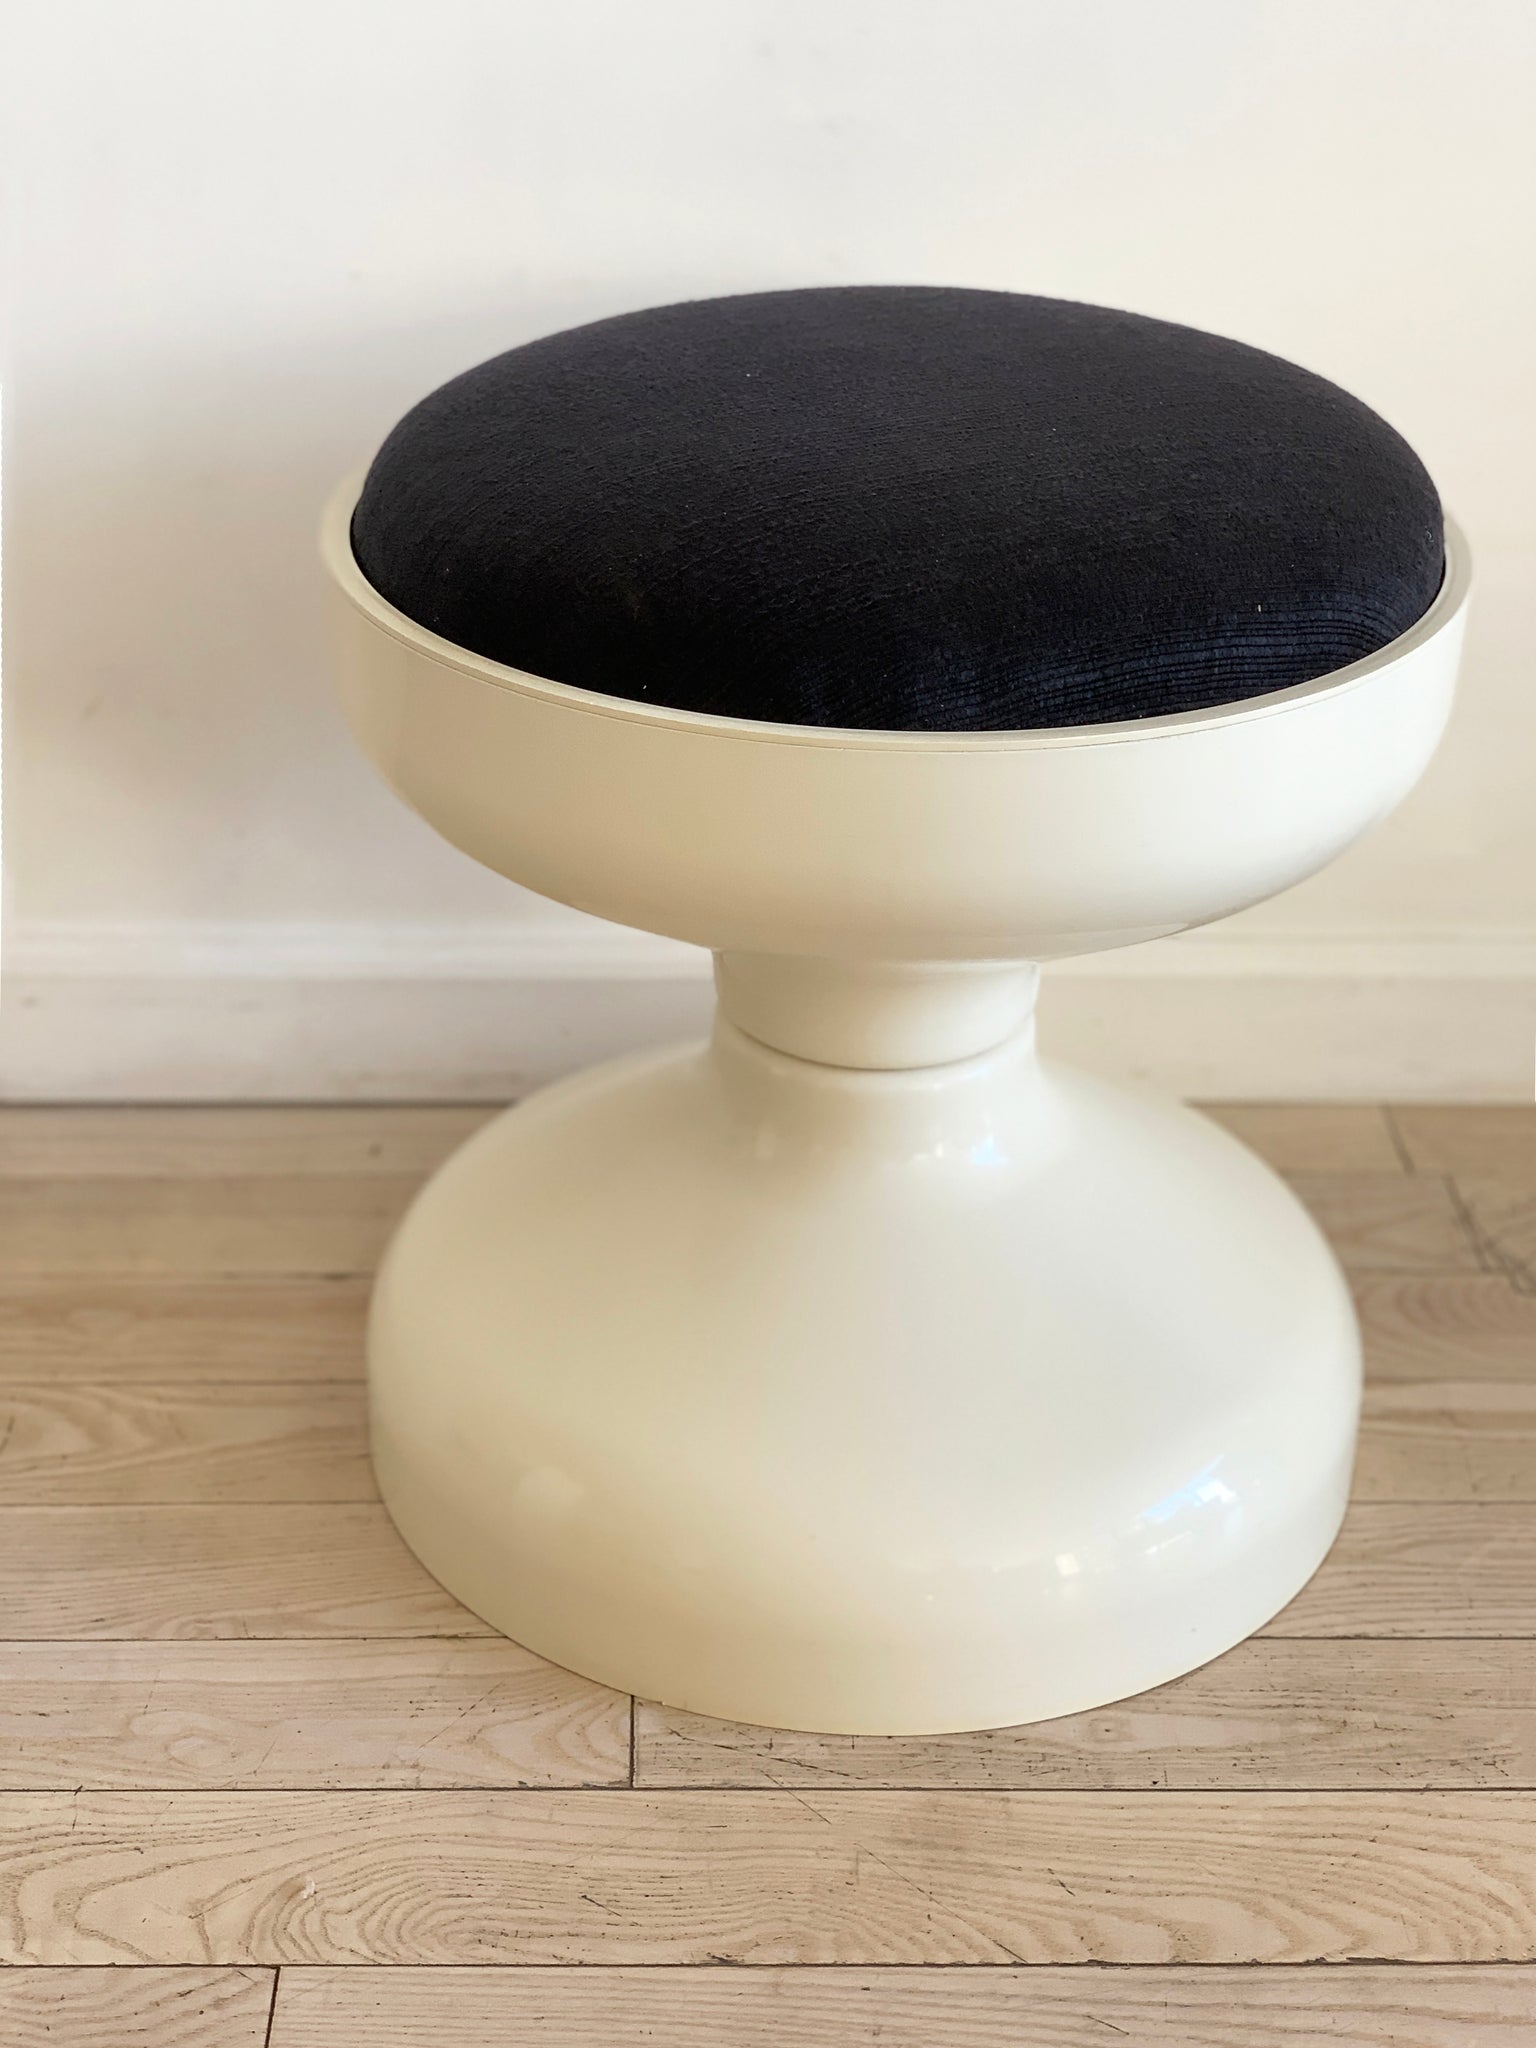 1960s White ABS Plastic "Rocchetto" Stool by Kartell